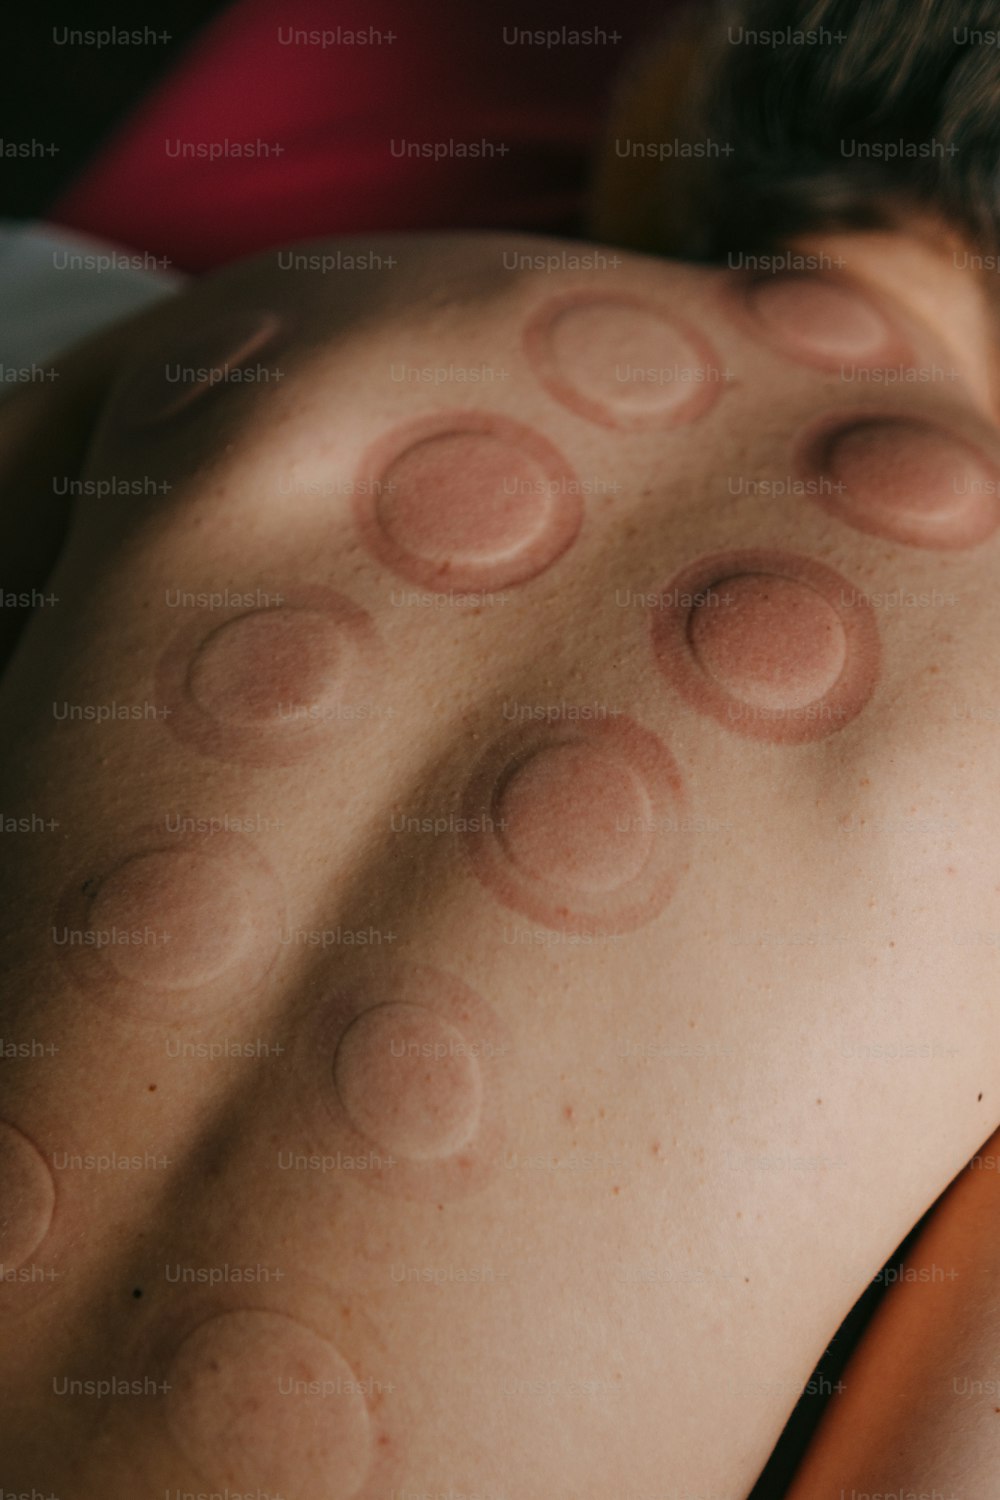 a man laying in bed with a lot of circles on his back